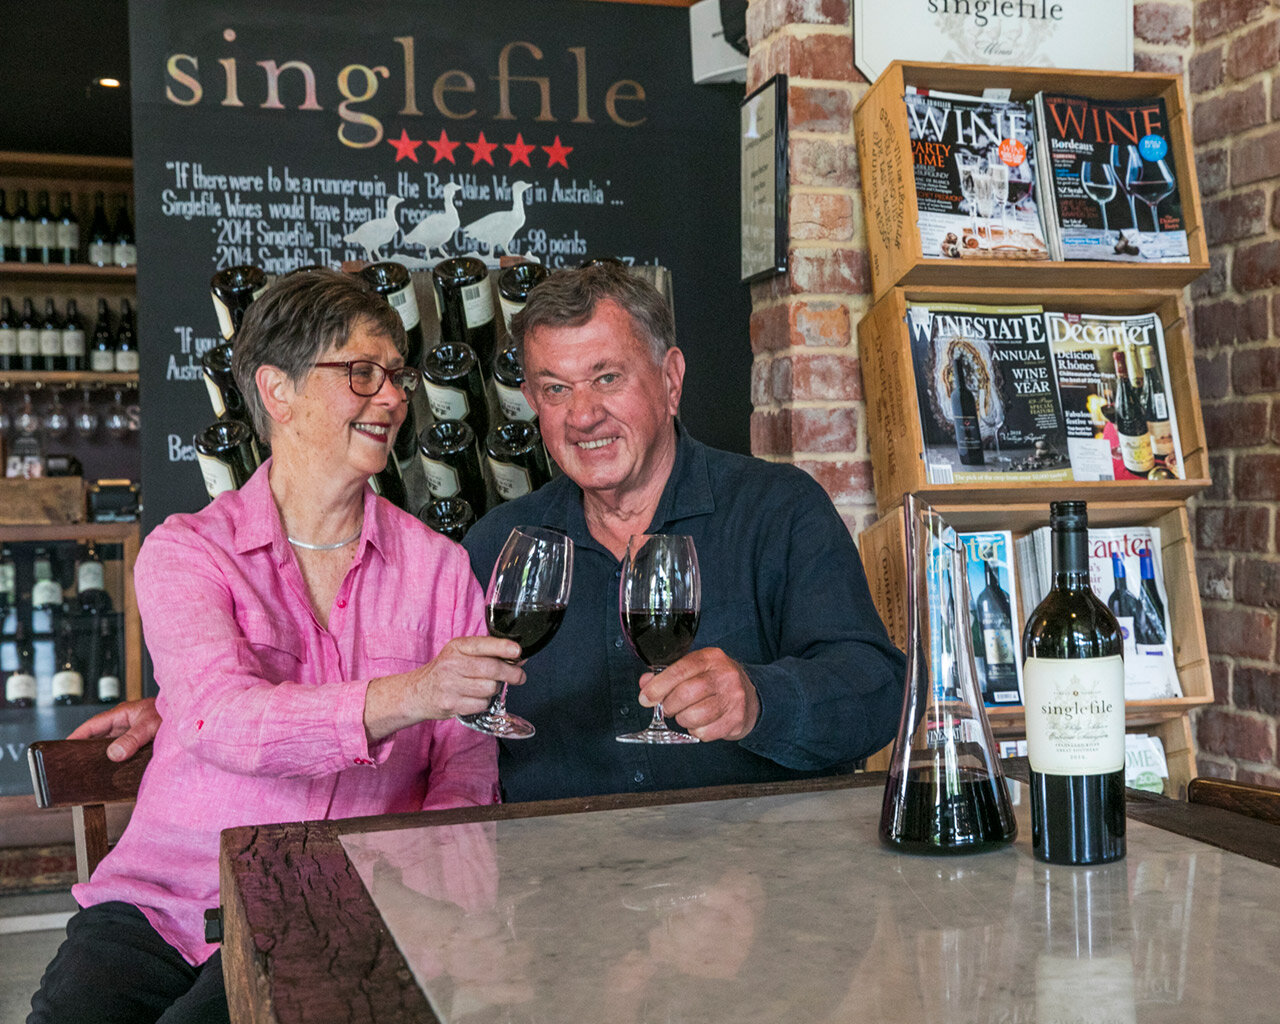 Viv and Phil Snowden, owners of Singlefile Wines i